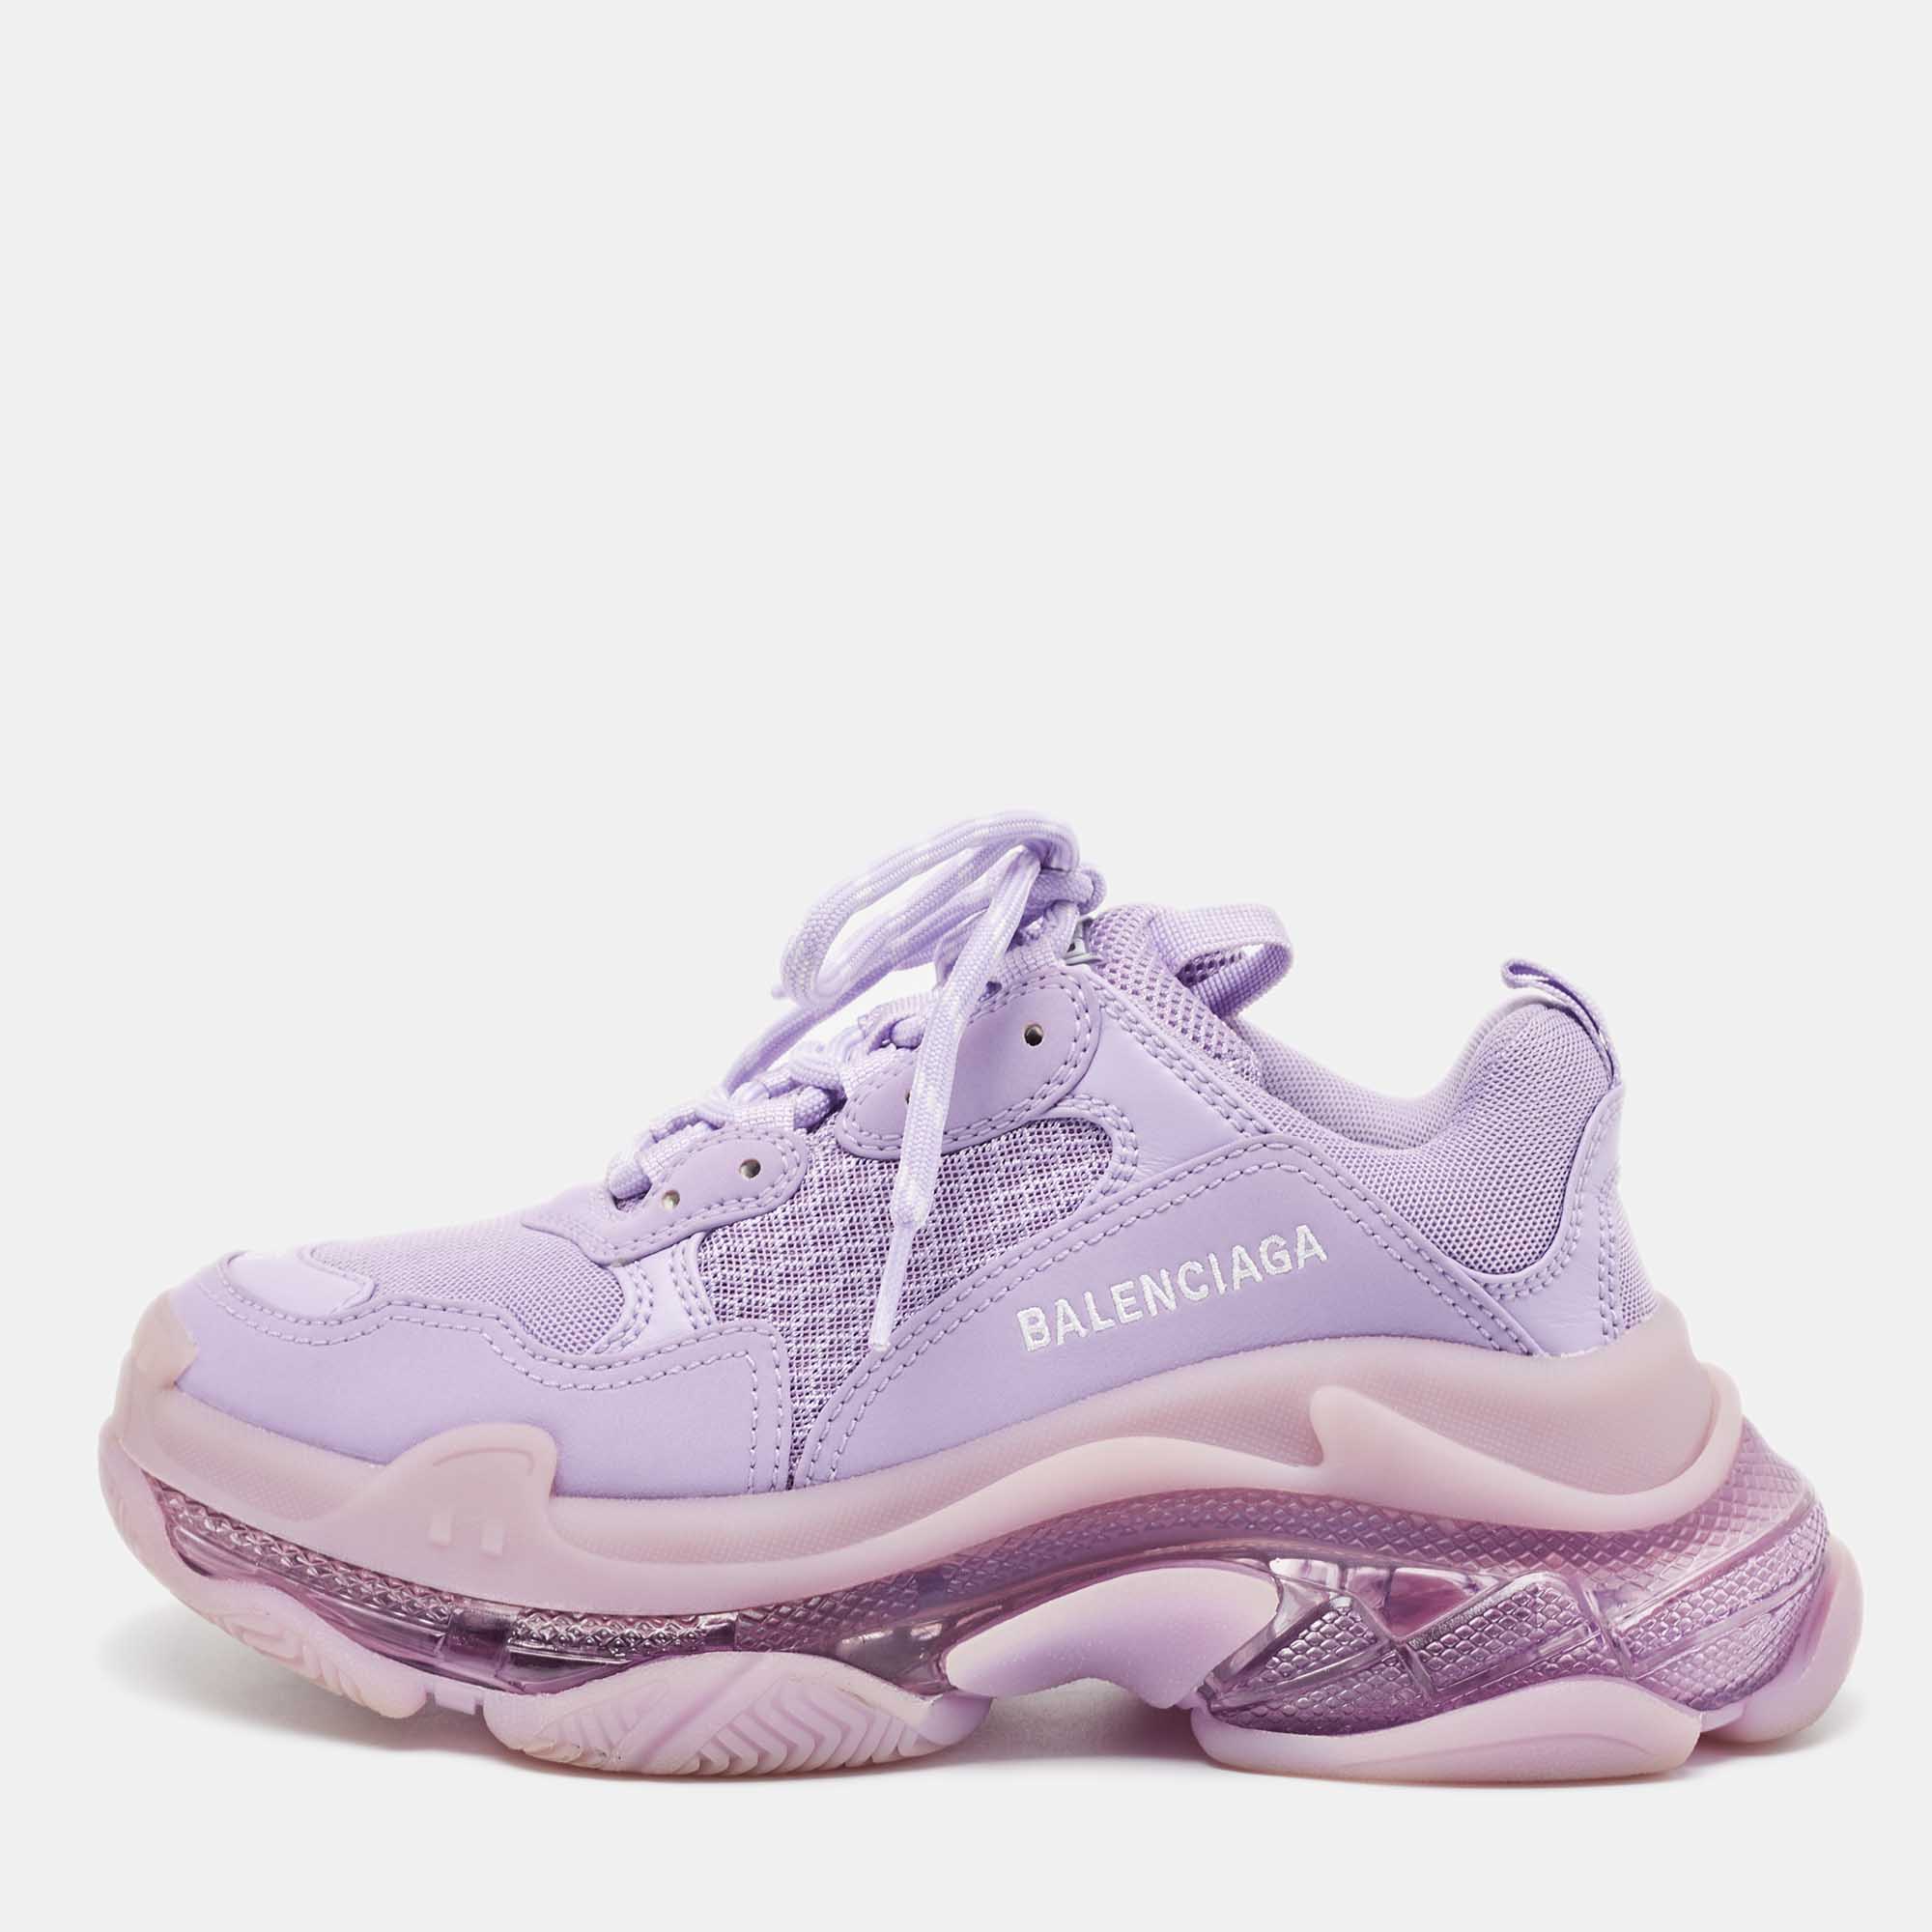 Balenciaga Purple Mesh And Leather Triple S Clear Sole Sneakers Size 37